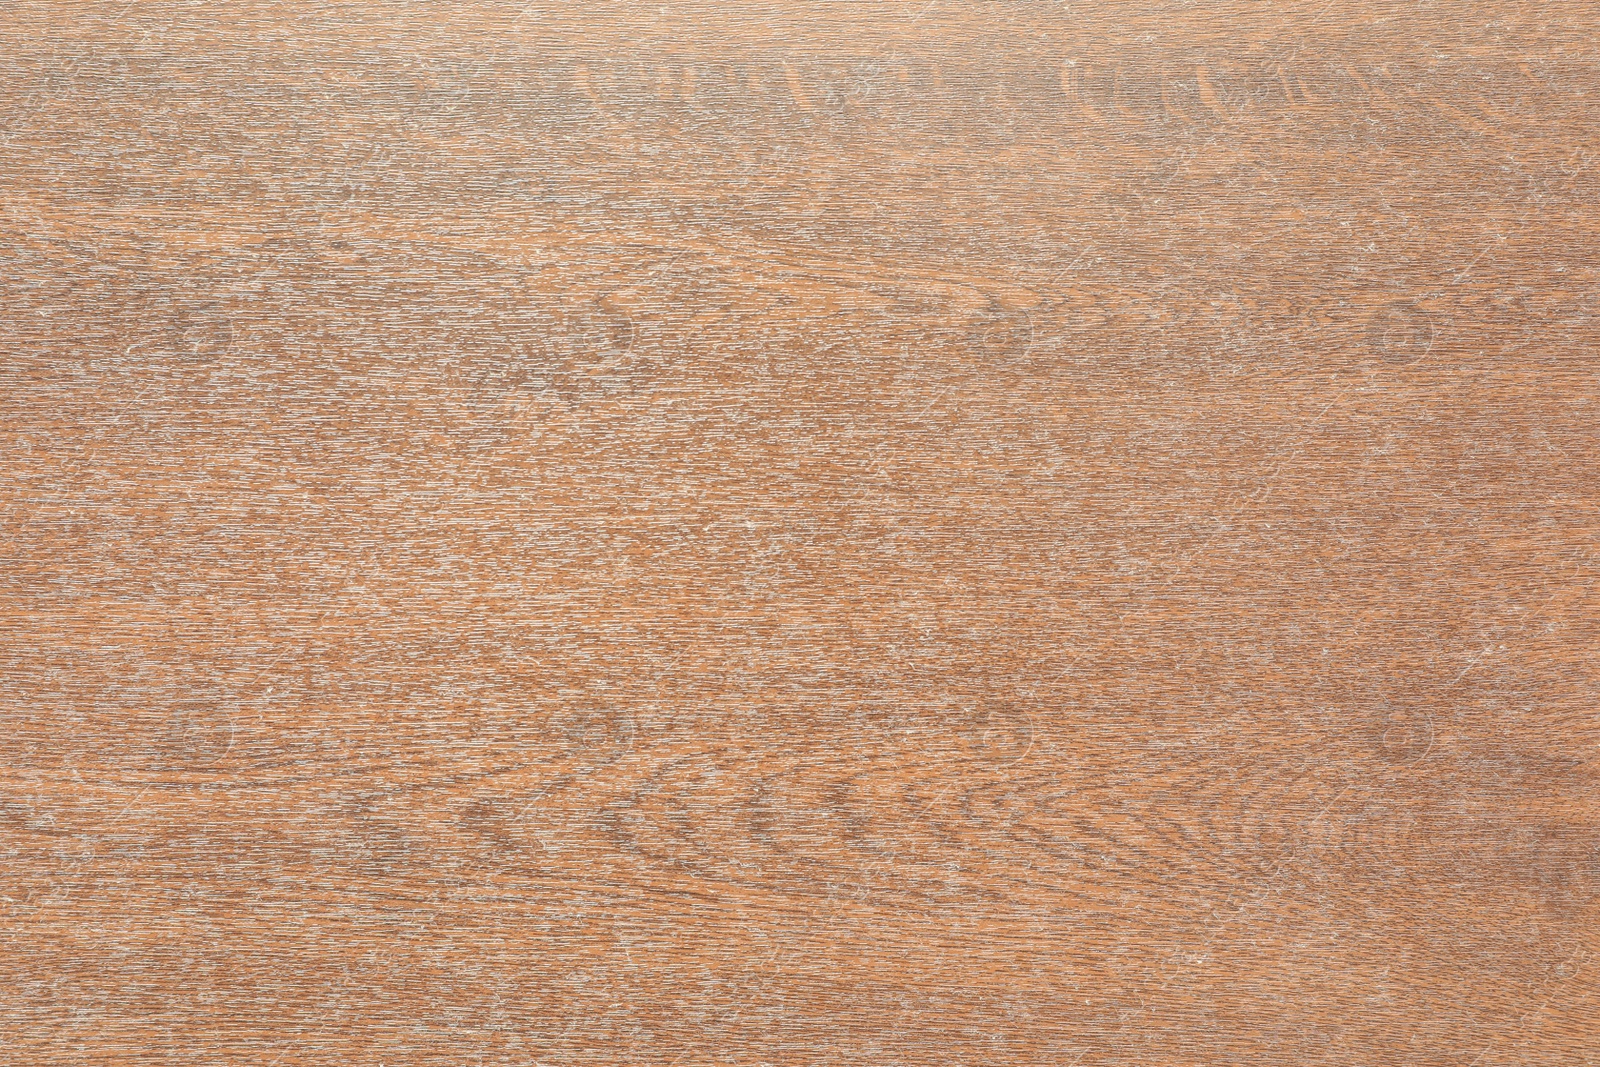 Photo of Texture of brown wooden surface as background